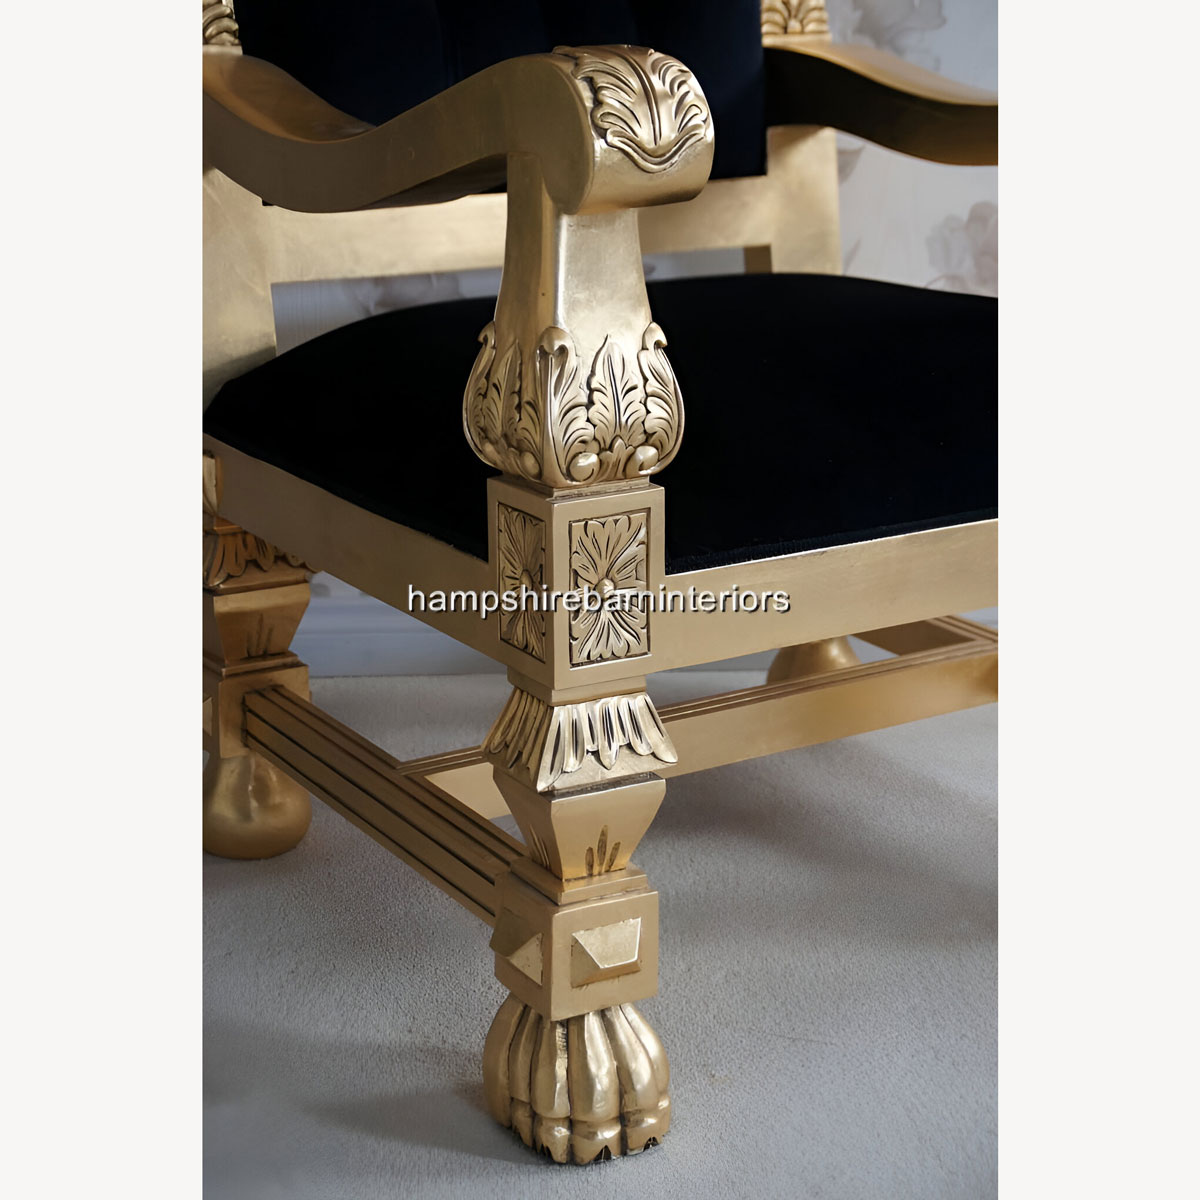 Queens Throne Chair Gold Leaf Black Velvet And Diamond Crystal Buttons 4 - Hampshire Barn Interiors - Queens Throne Chair Gold Leaf, Black Velvet And Diamond Crystal Buttons -